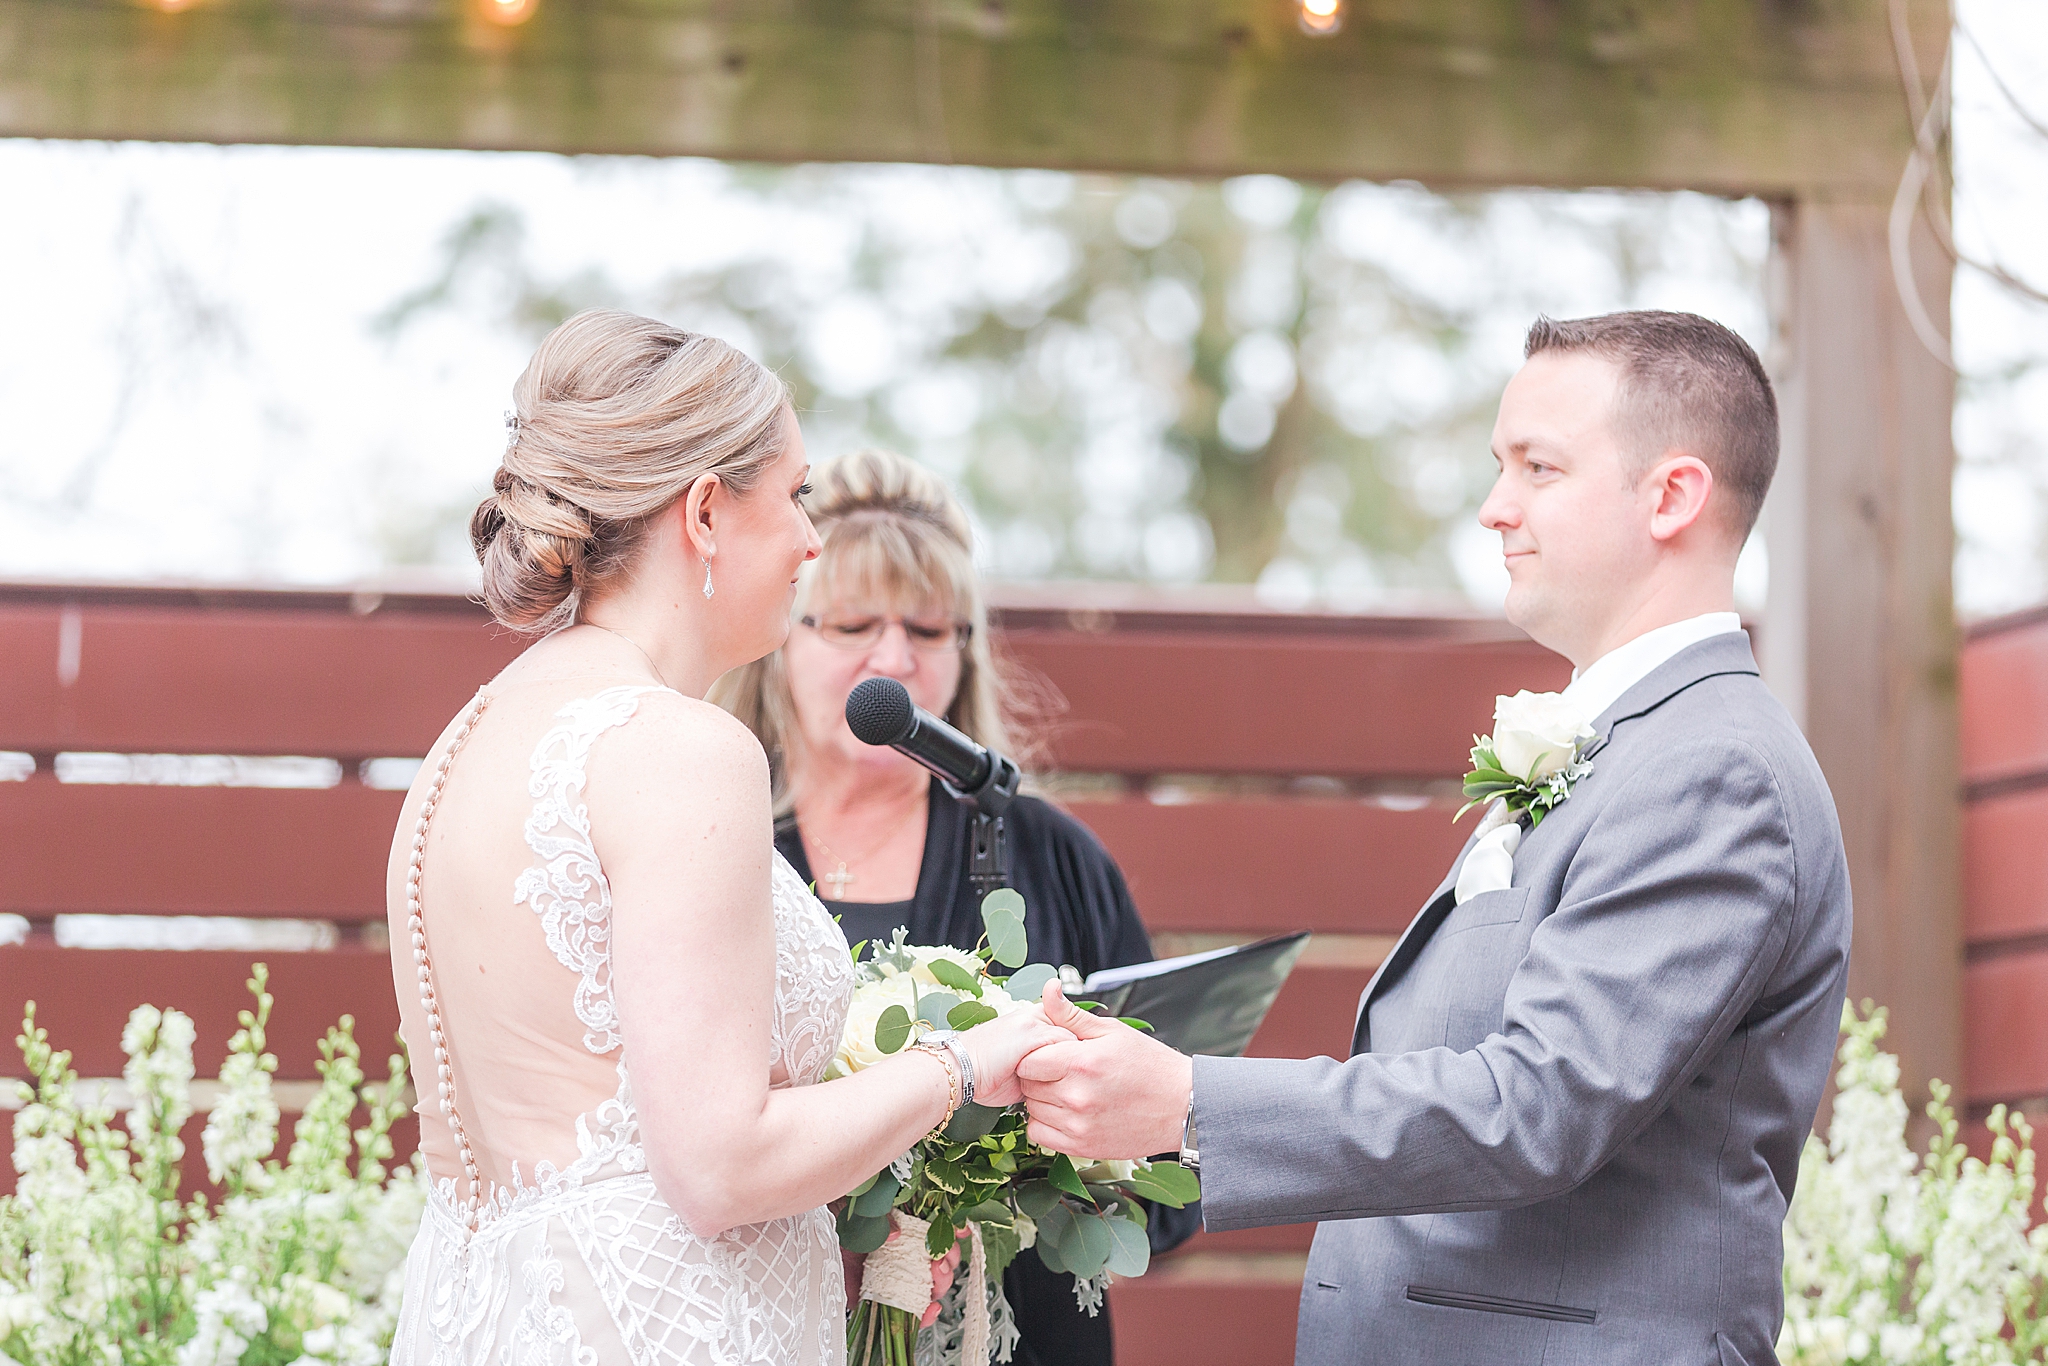 modern-romantic-wedding-photography-at-webers-in-ann-arbor-michigan-by-courtney-carolyn-photography_0061.jpg